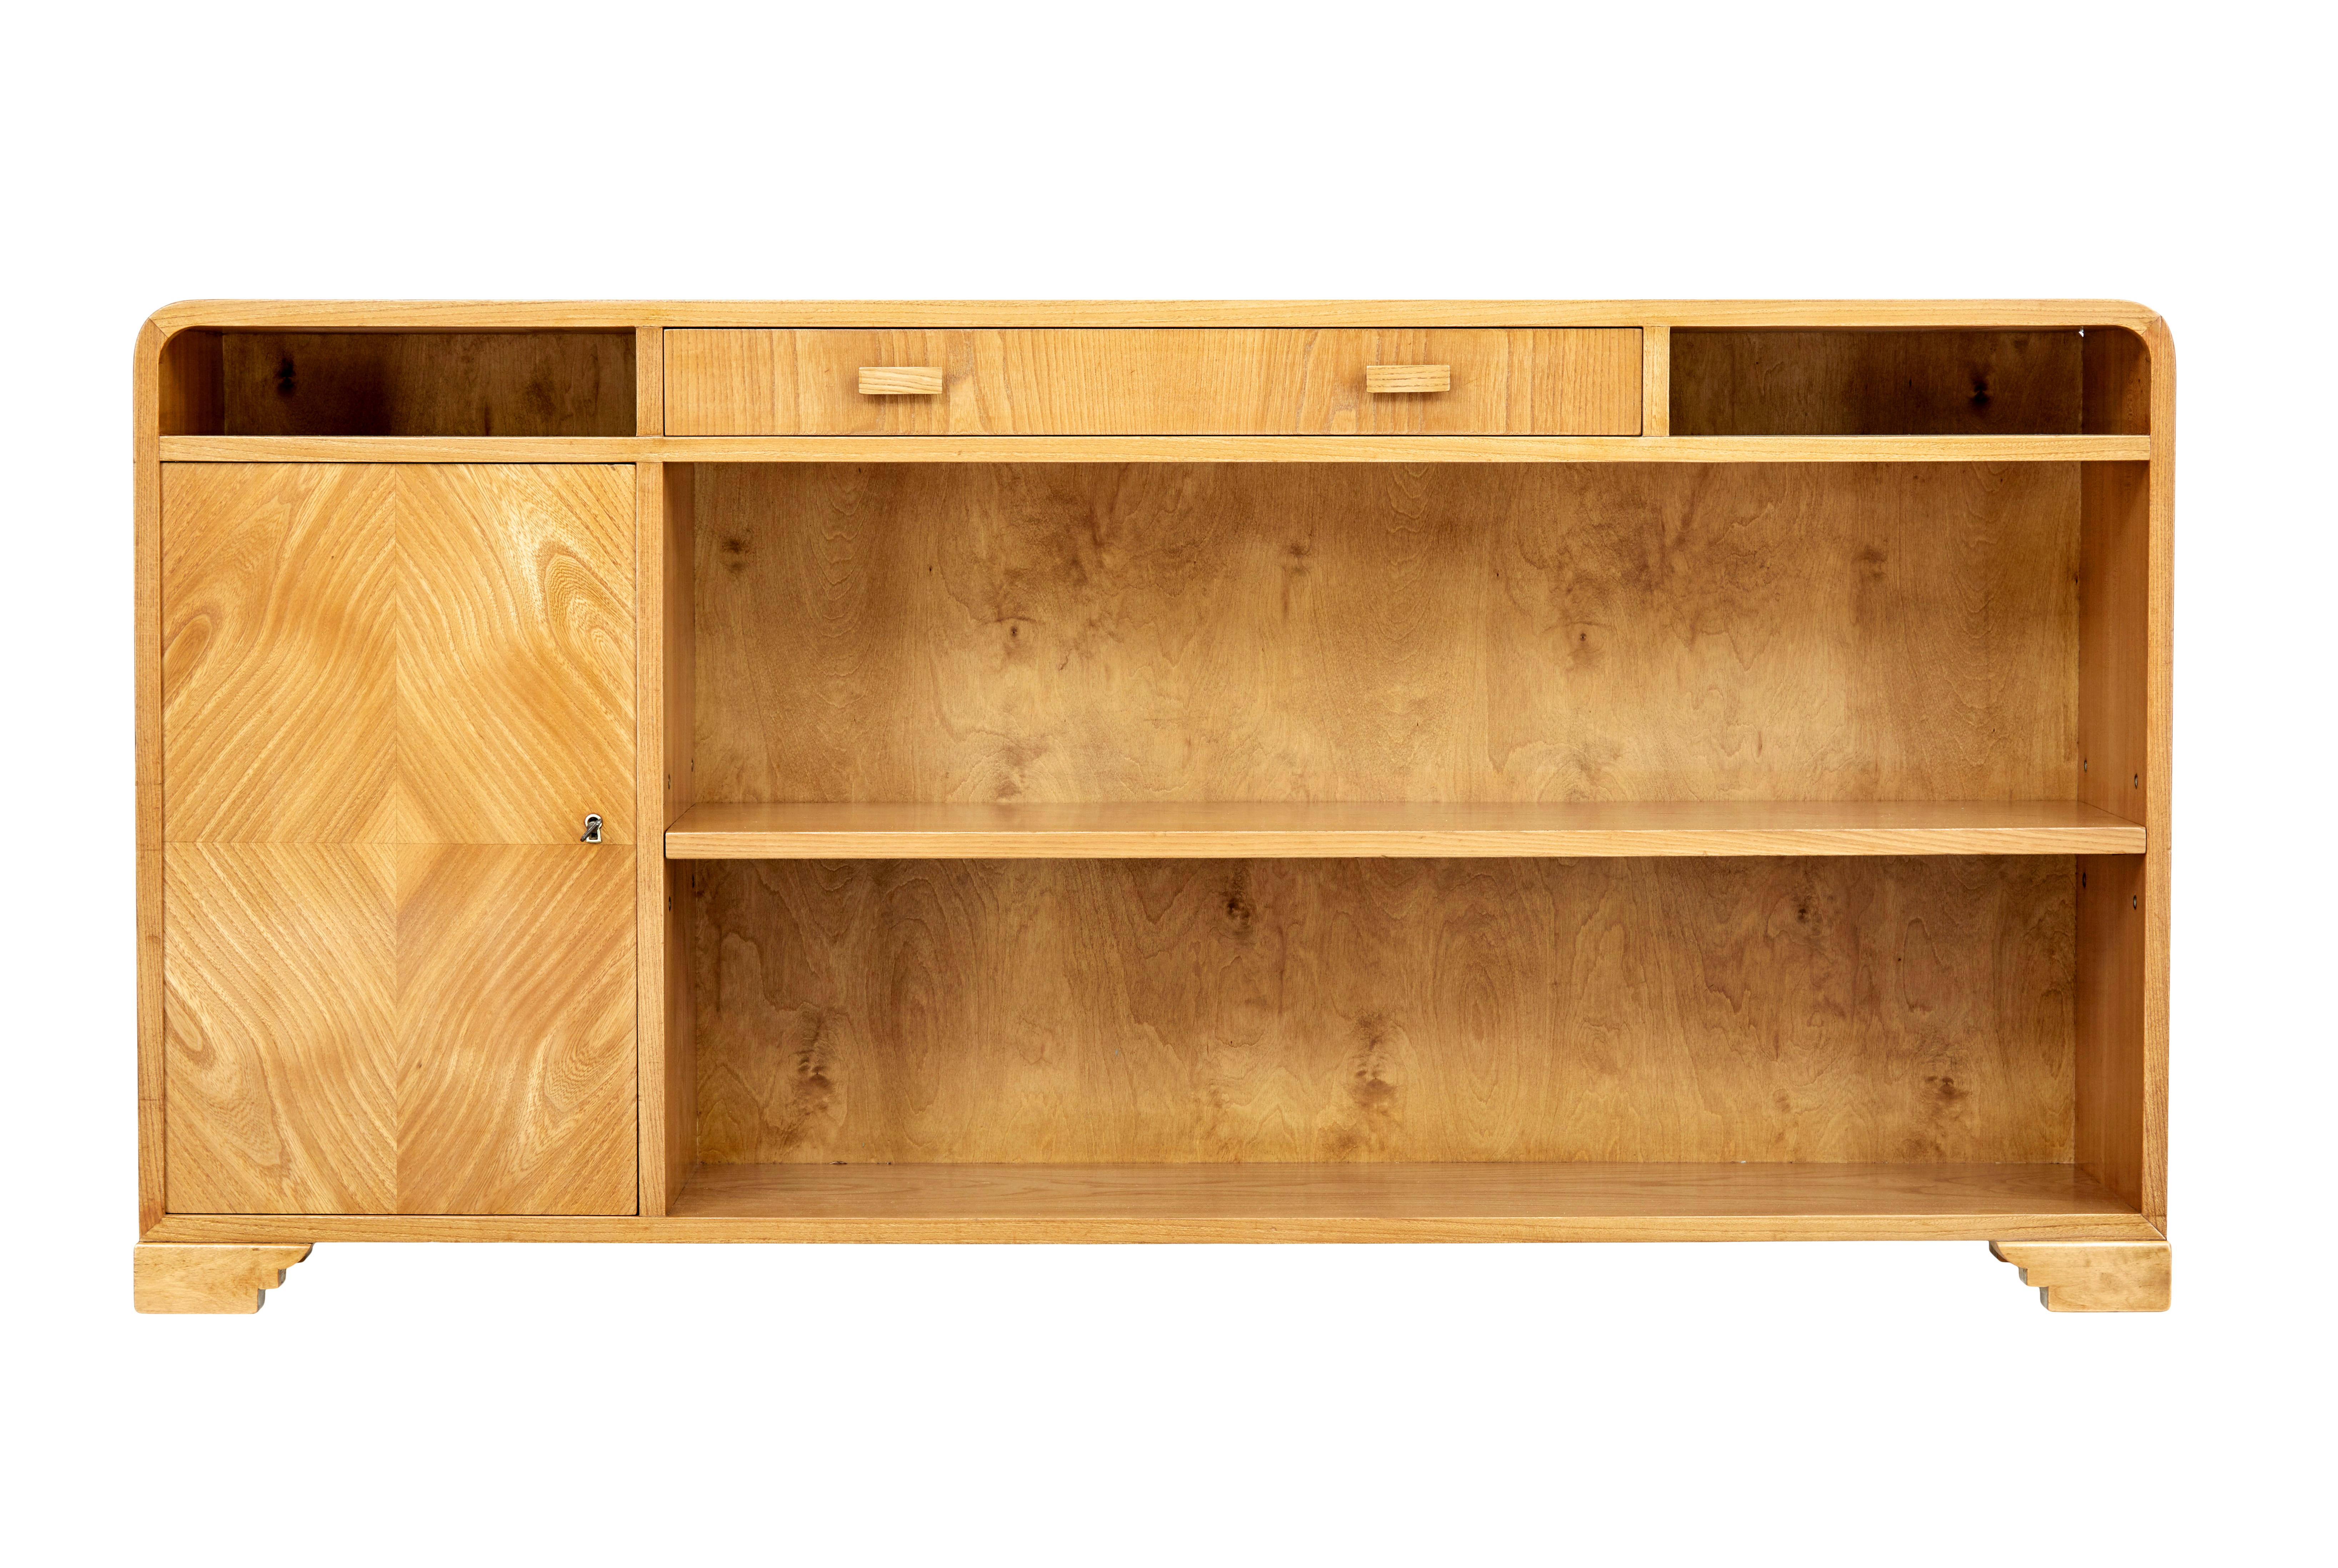 Scandinavian mid 20th century elm low open bookcase circa 1950.

Superb storage solution for small spaces.  Beautifully veneered in elm, with rounded corners to provide that deco inspired look.   Central drawer below the top surface with a open